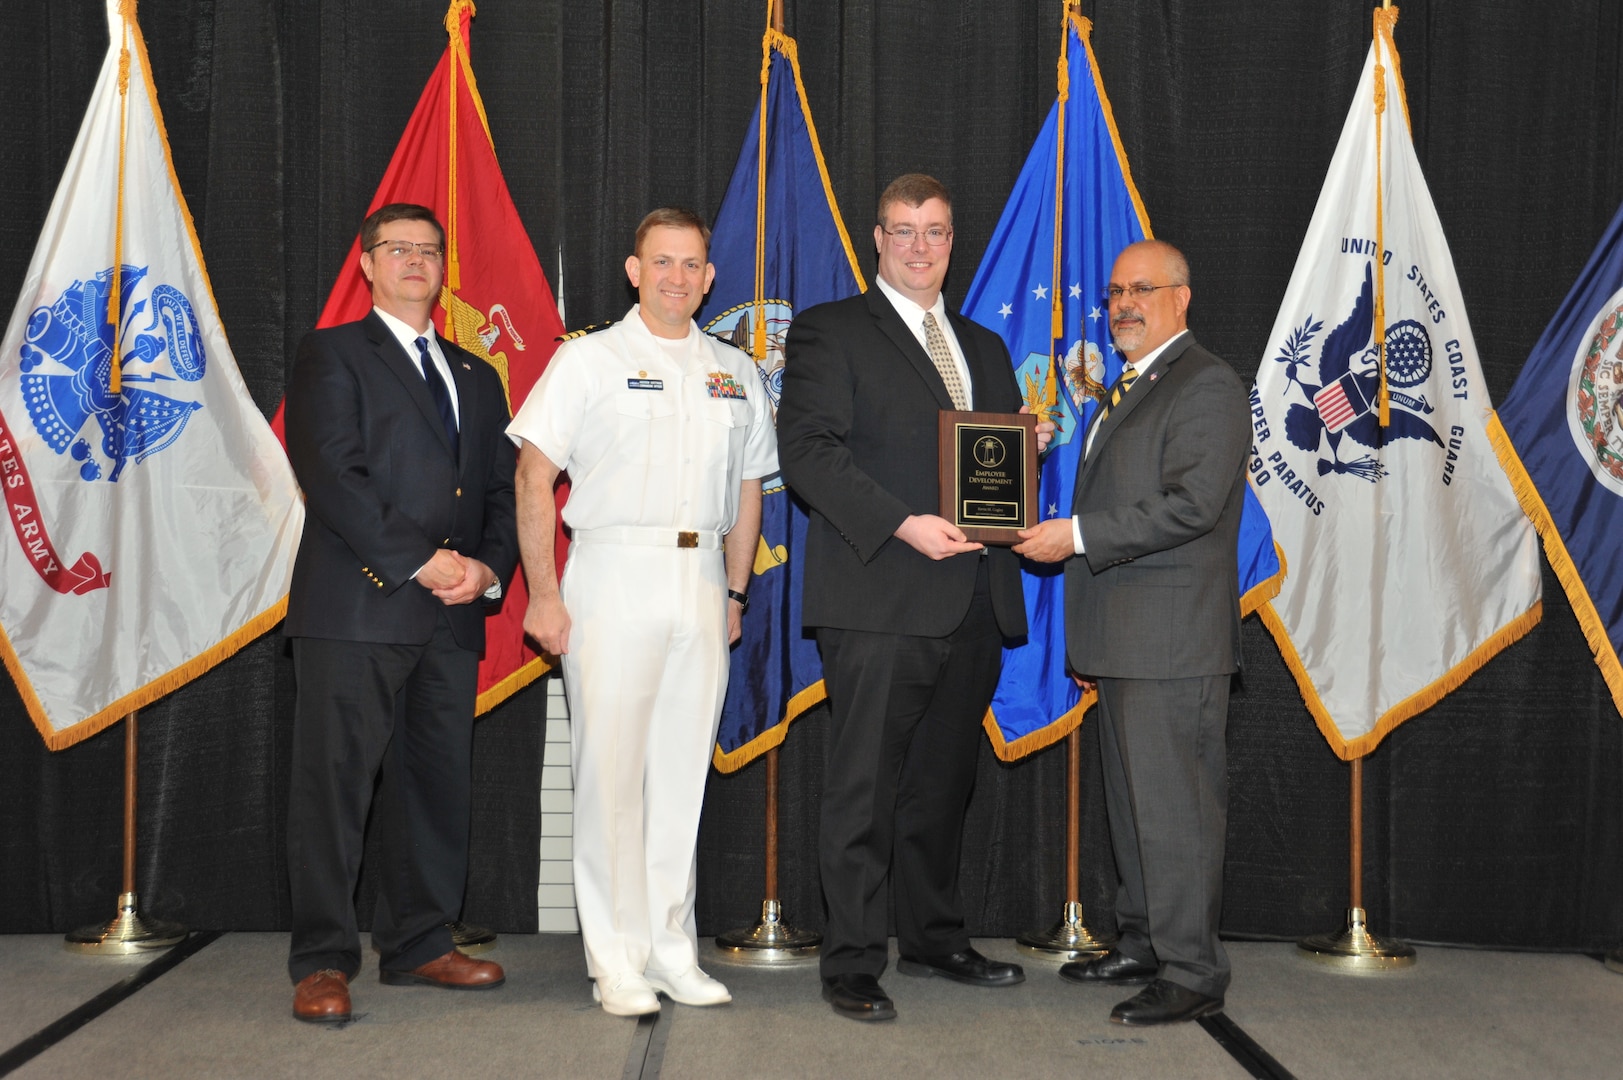 IMAGE: Kevin Cogley is presented the Employee Development Award at Naval Surface Warfare Center Dahlgren Division's annual awards ceremony, Apr. 26 at the Fredericksburg Expo and Conference Center.

The Employee Development Award was established to recognize those individuals who – through their leadership and commitment – have made exemplary contributions to the development of others.